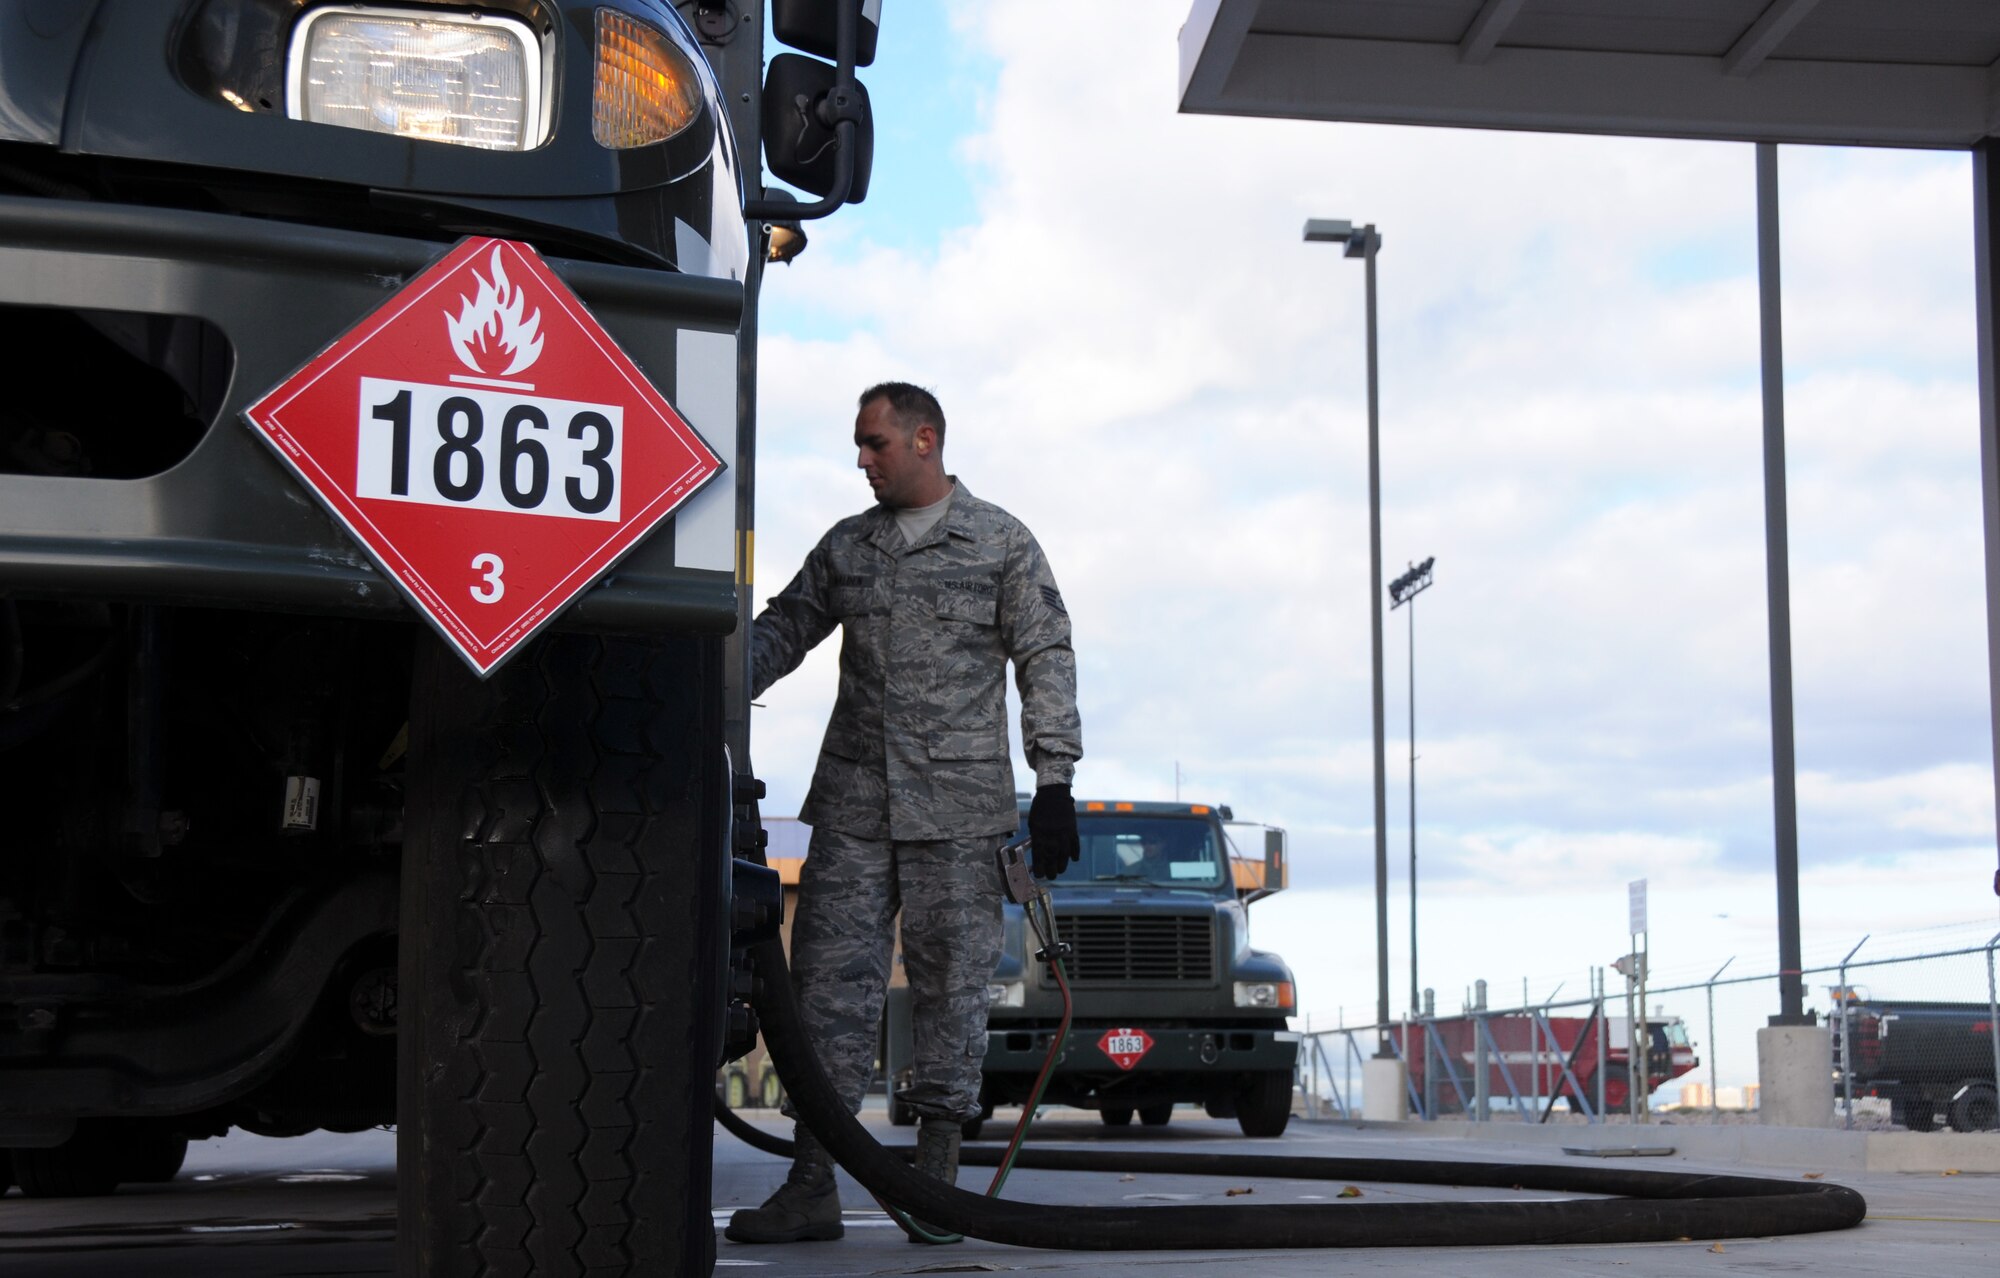 Staff Sgt. Donovan Walden, 161st Logistics Readiness Group fuels technician, monitors the gauges on a fuel truck as part of a routine inspection during an aircraft generation exercise, Phoenix, Nov. 5, 2011. In order to maintain safety on the flightline, these six thousand gallon fuel trucks are inspected daily for leaks and cracks in the pipes. (U.S. Air Force Photo by Staff Sgt. Courtney Enos/Released)